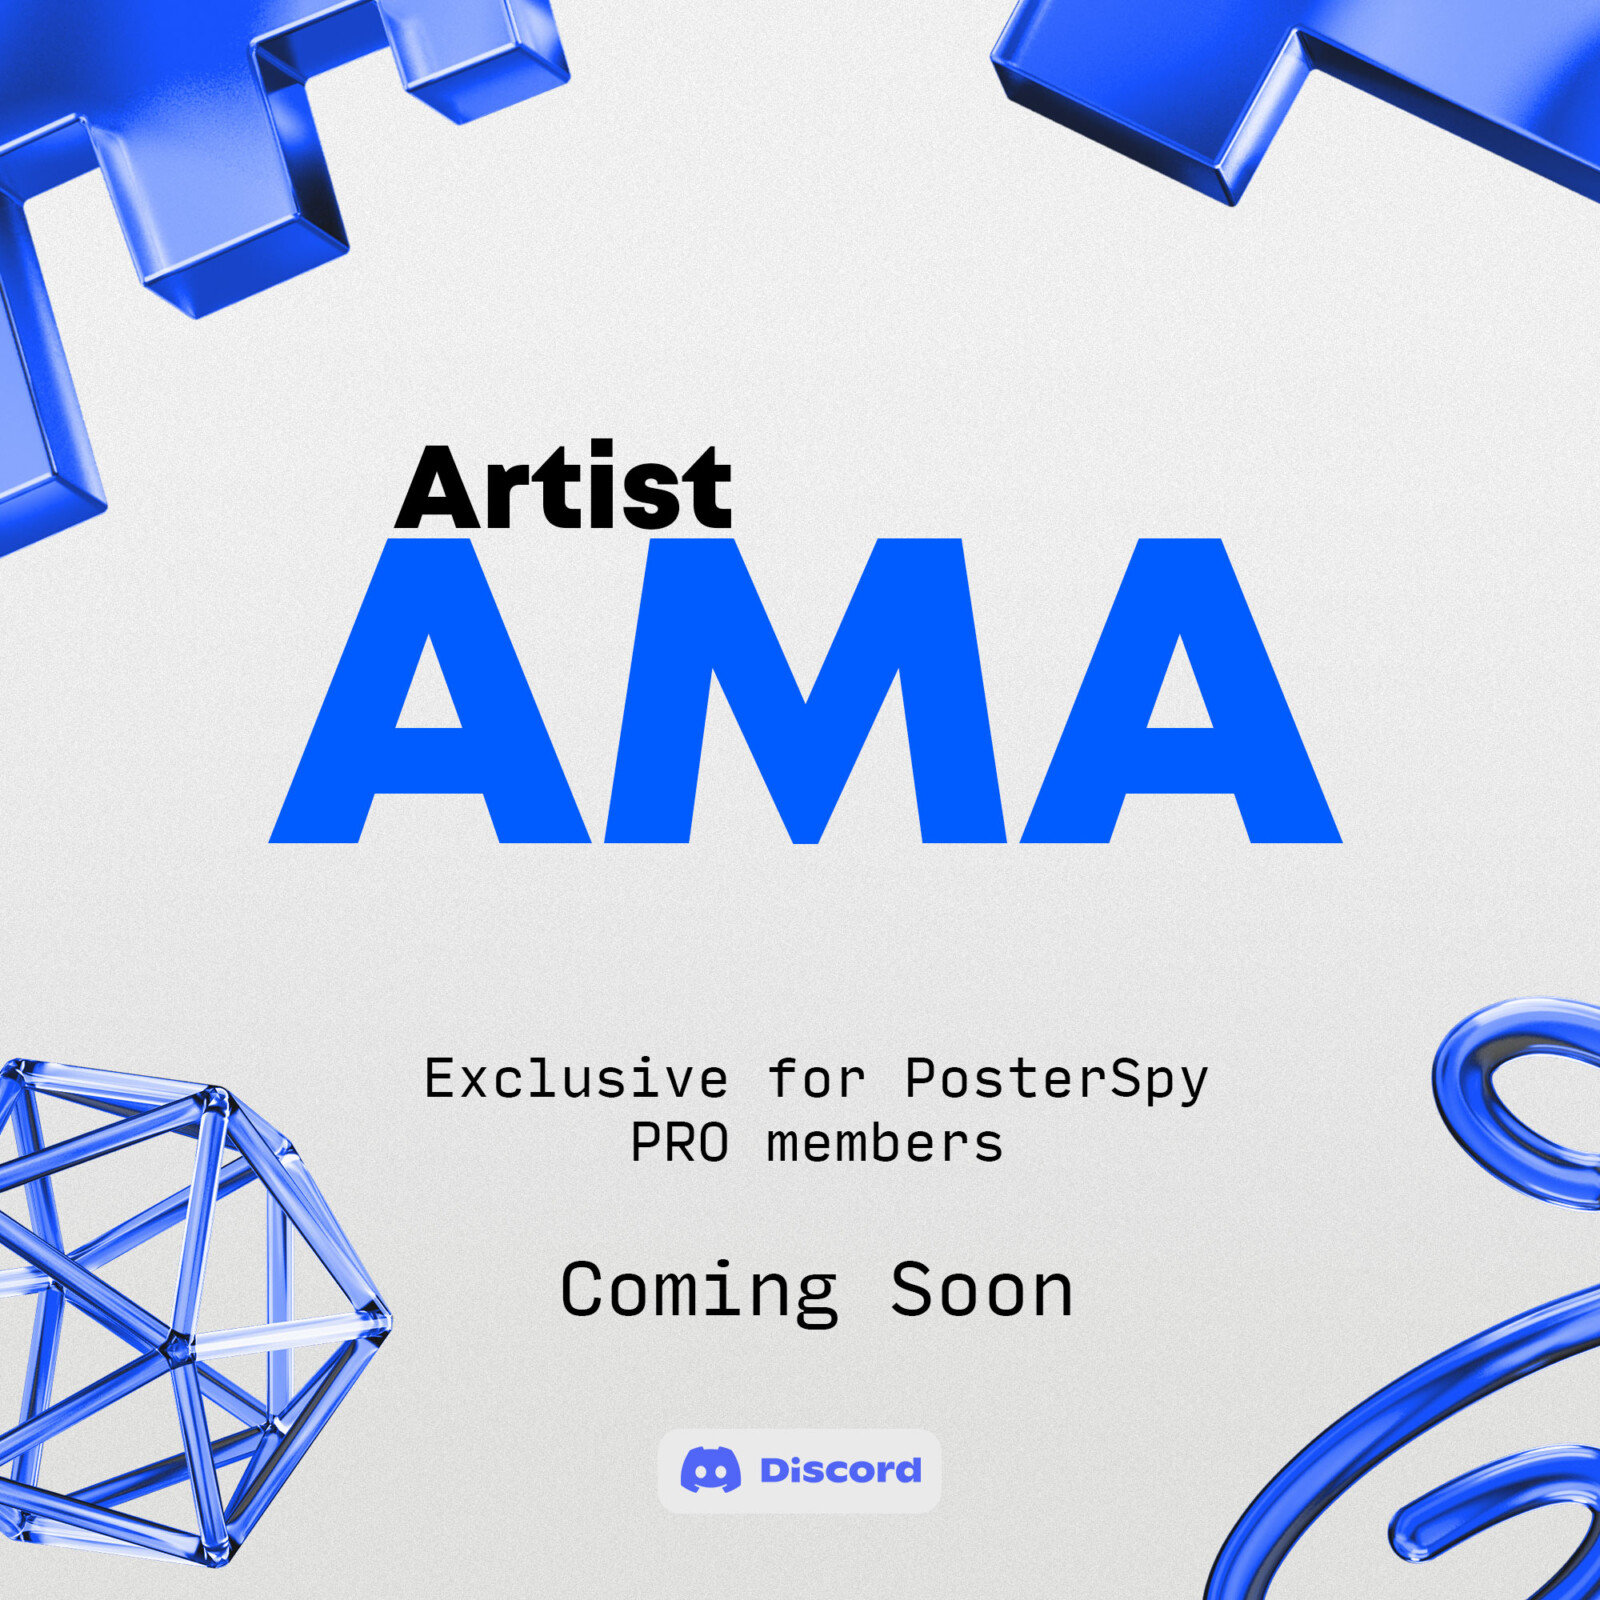 PosterSpy To Launch New AMA Sessions for PRO Members